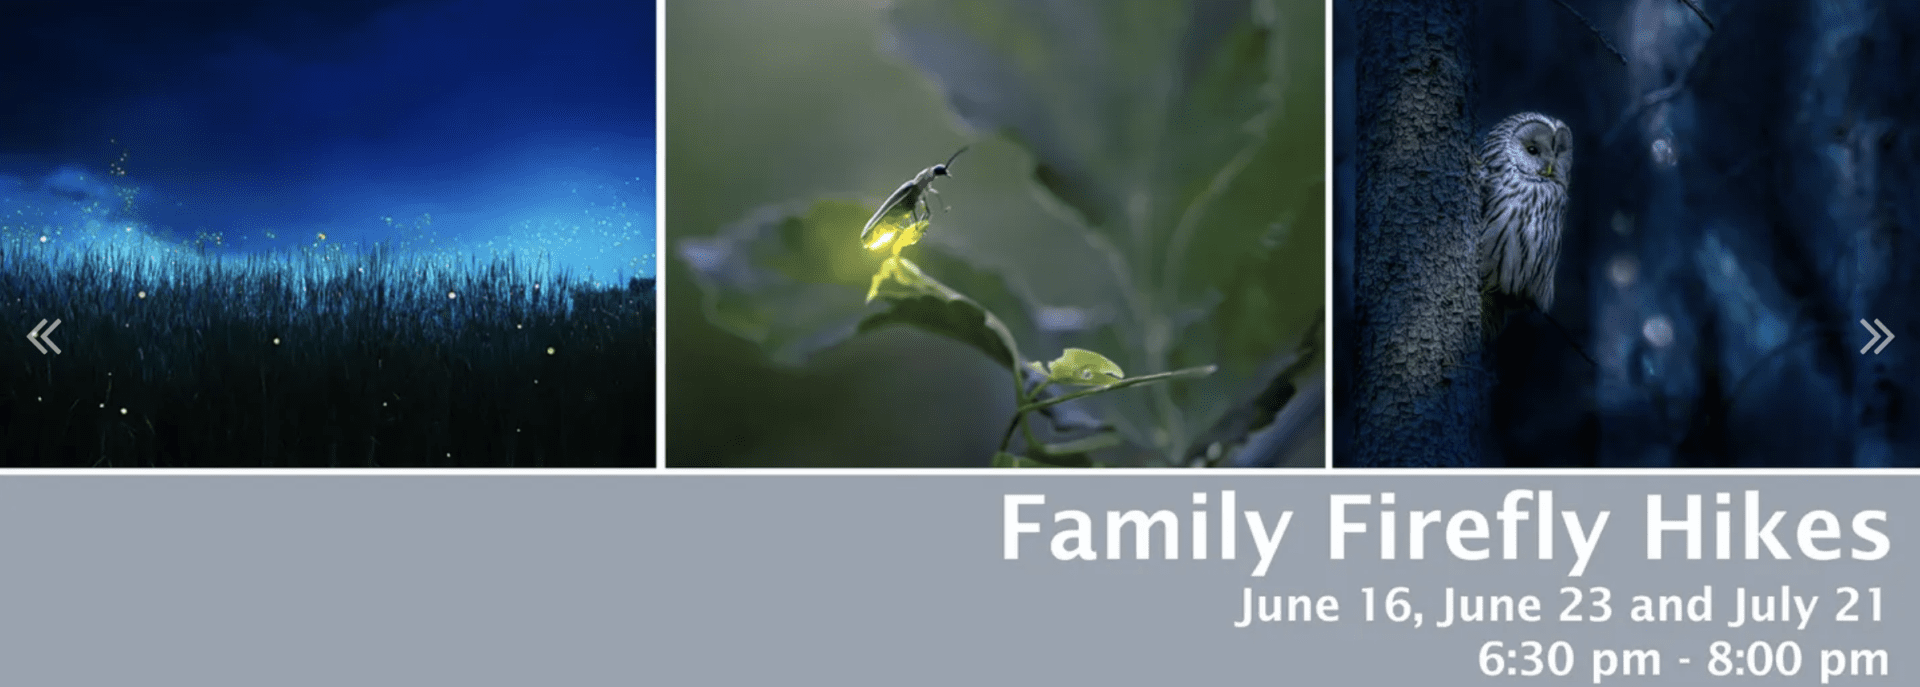 Family Firefly Hikes, Brentwood, TN family activities at Owl's Hill.